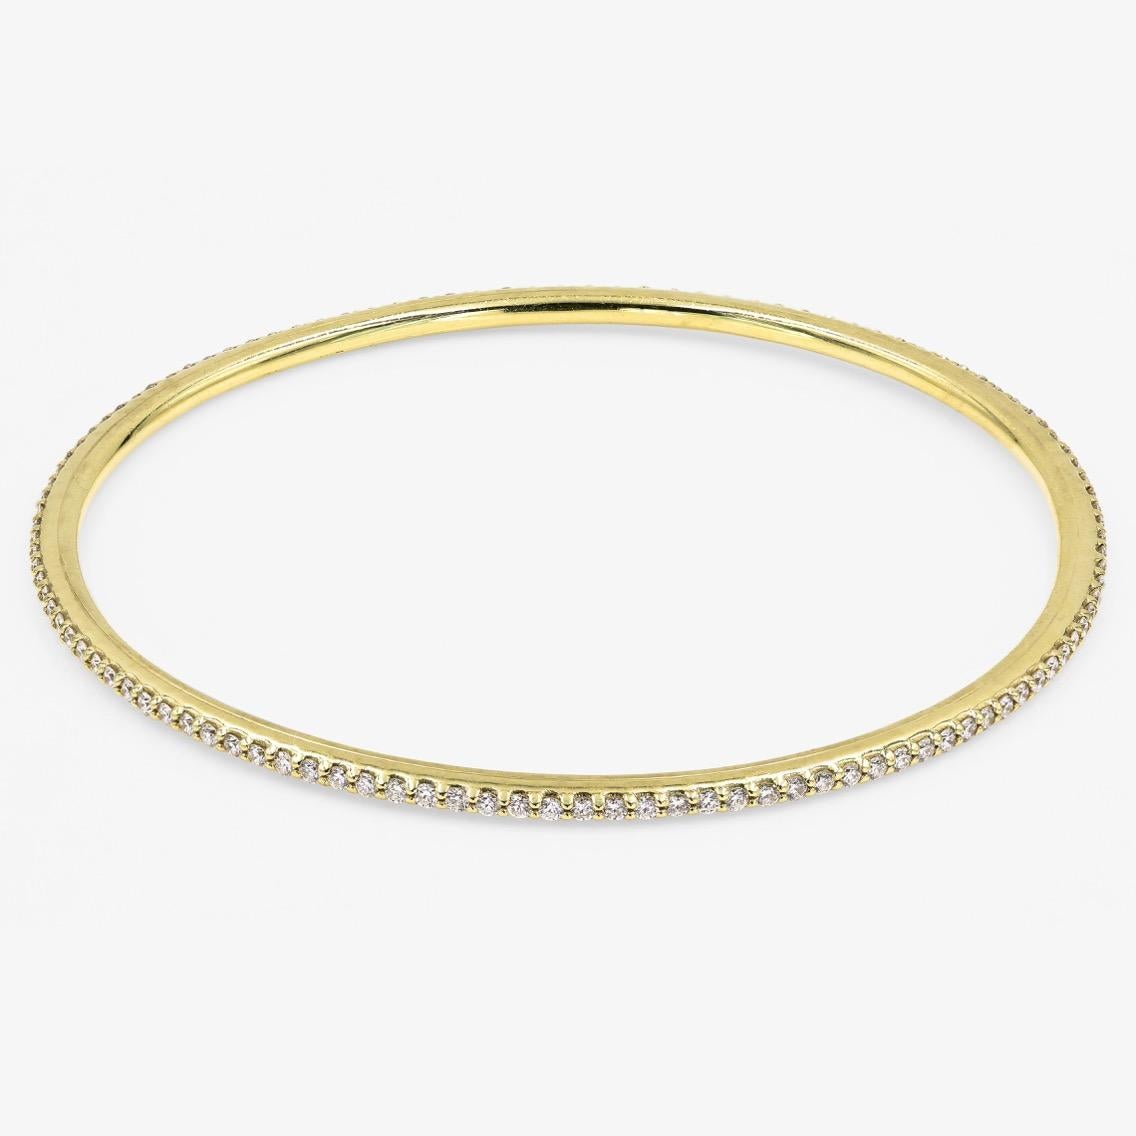 This Lester Lampert original D-Bead™ style bangle bracelet in 18kt. yellow gold contains 114 ideal cut round diamonds = 1.84cts. t.w. There is no clasp.

Every Lester Lampert piece will arrive in an elegant custom jewelry box.